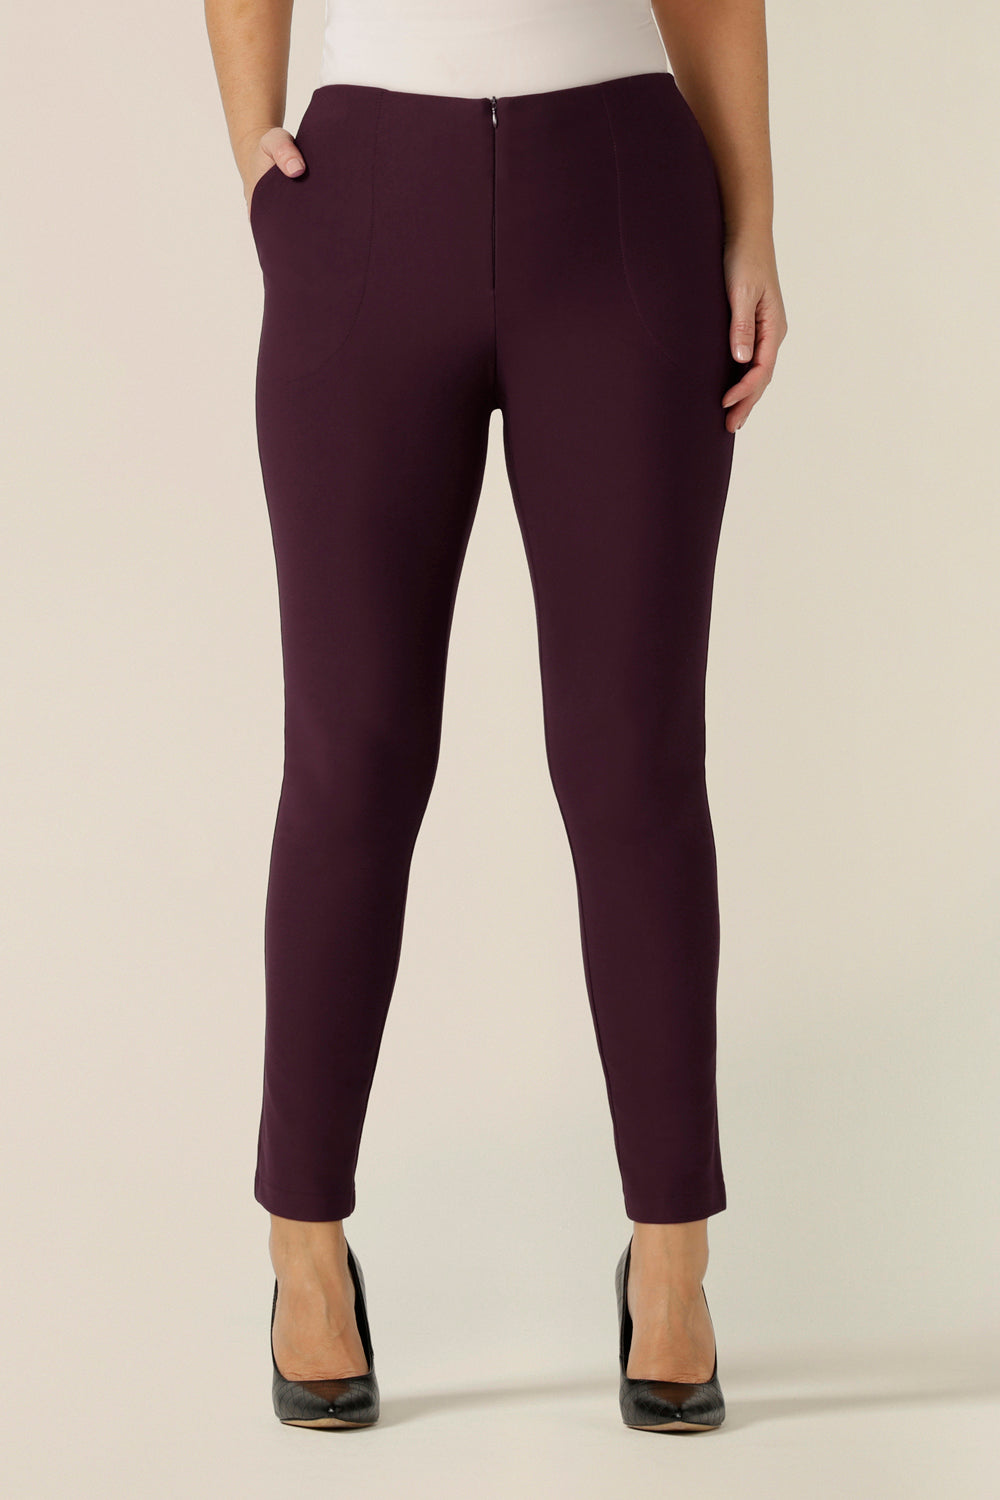 Slim leg, cropped length pants with pockets by Australian-made women's clothing brand, L&F. 